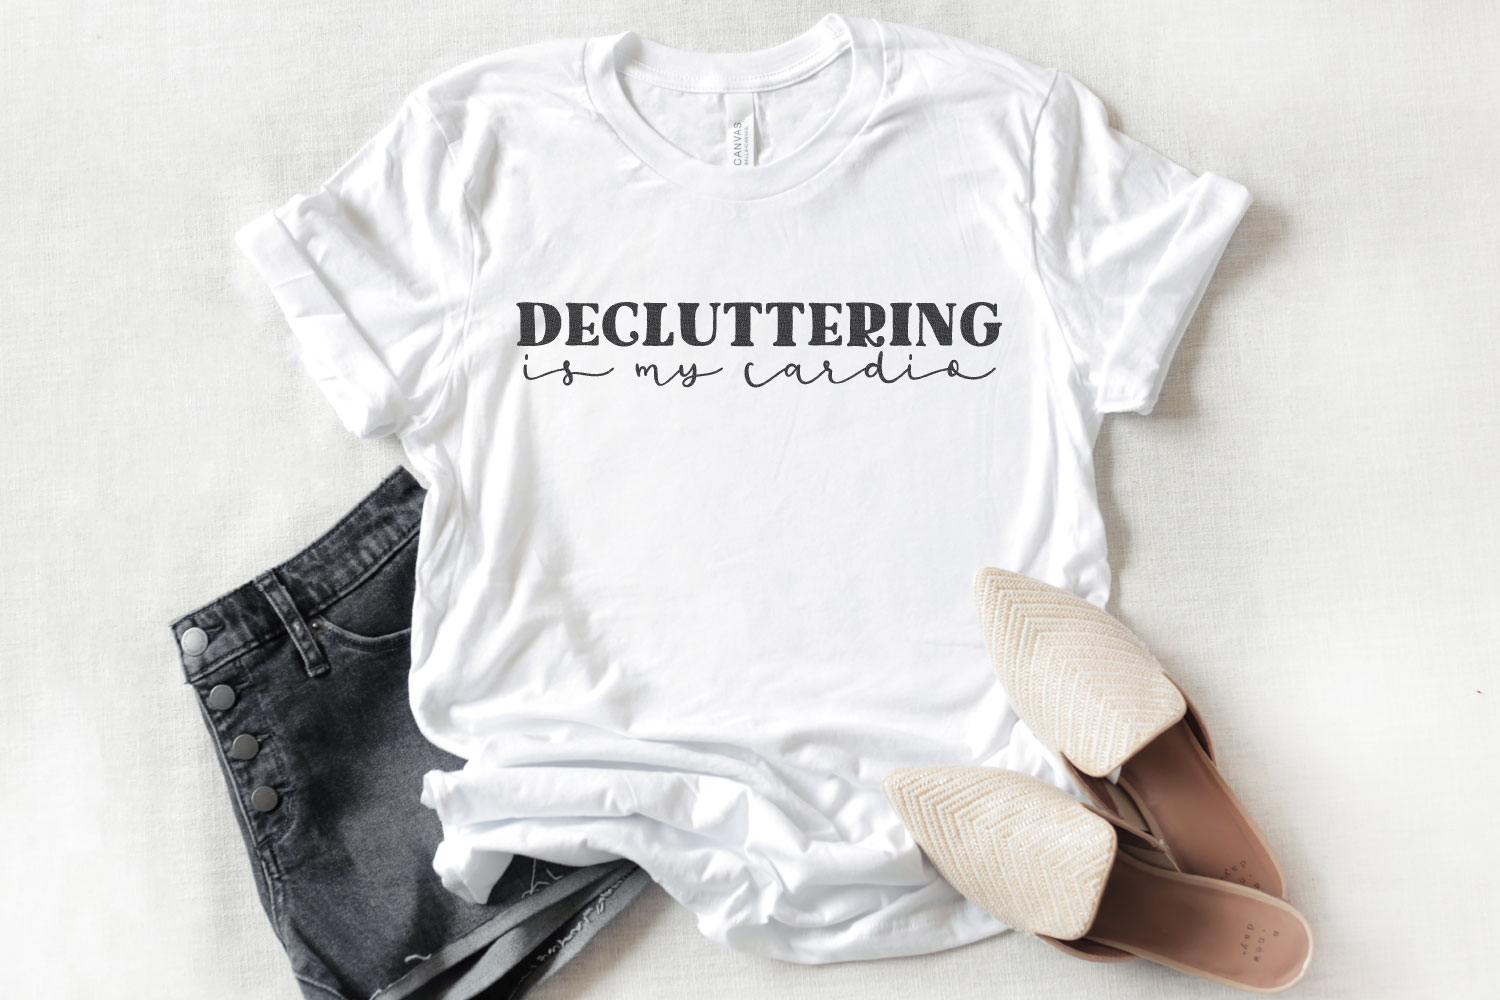 Decluttering is my Cardio quote on white t-shirt shown with a pair of shorts and flats